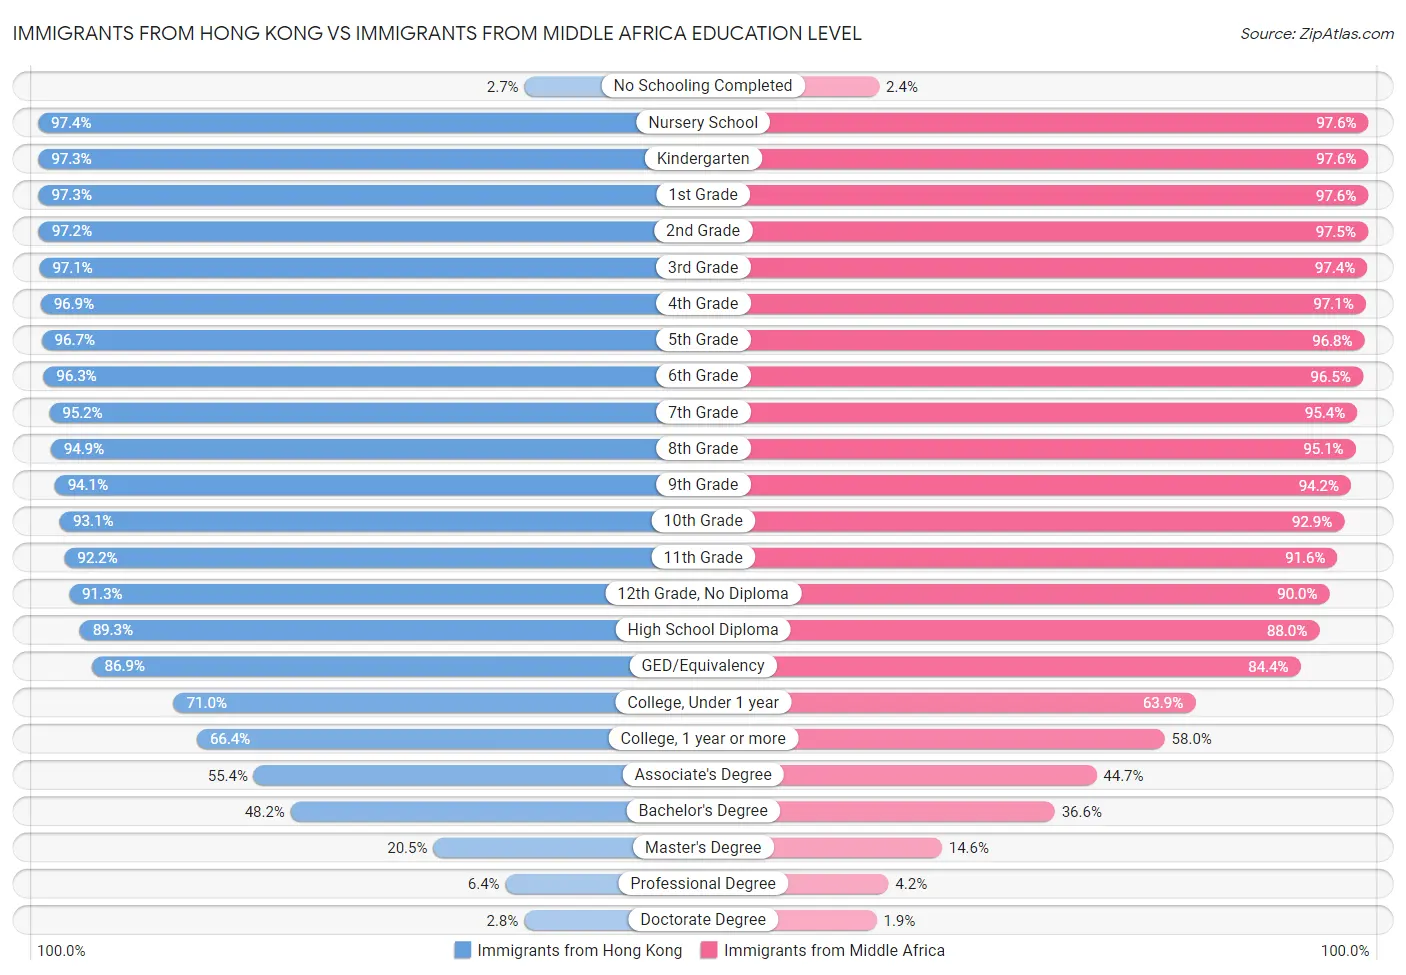 Immigrants from Hong Kong vs Immigrants from Middle Africa Education Level